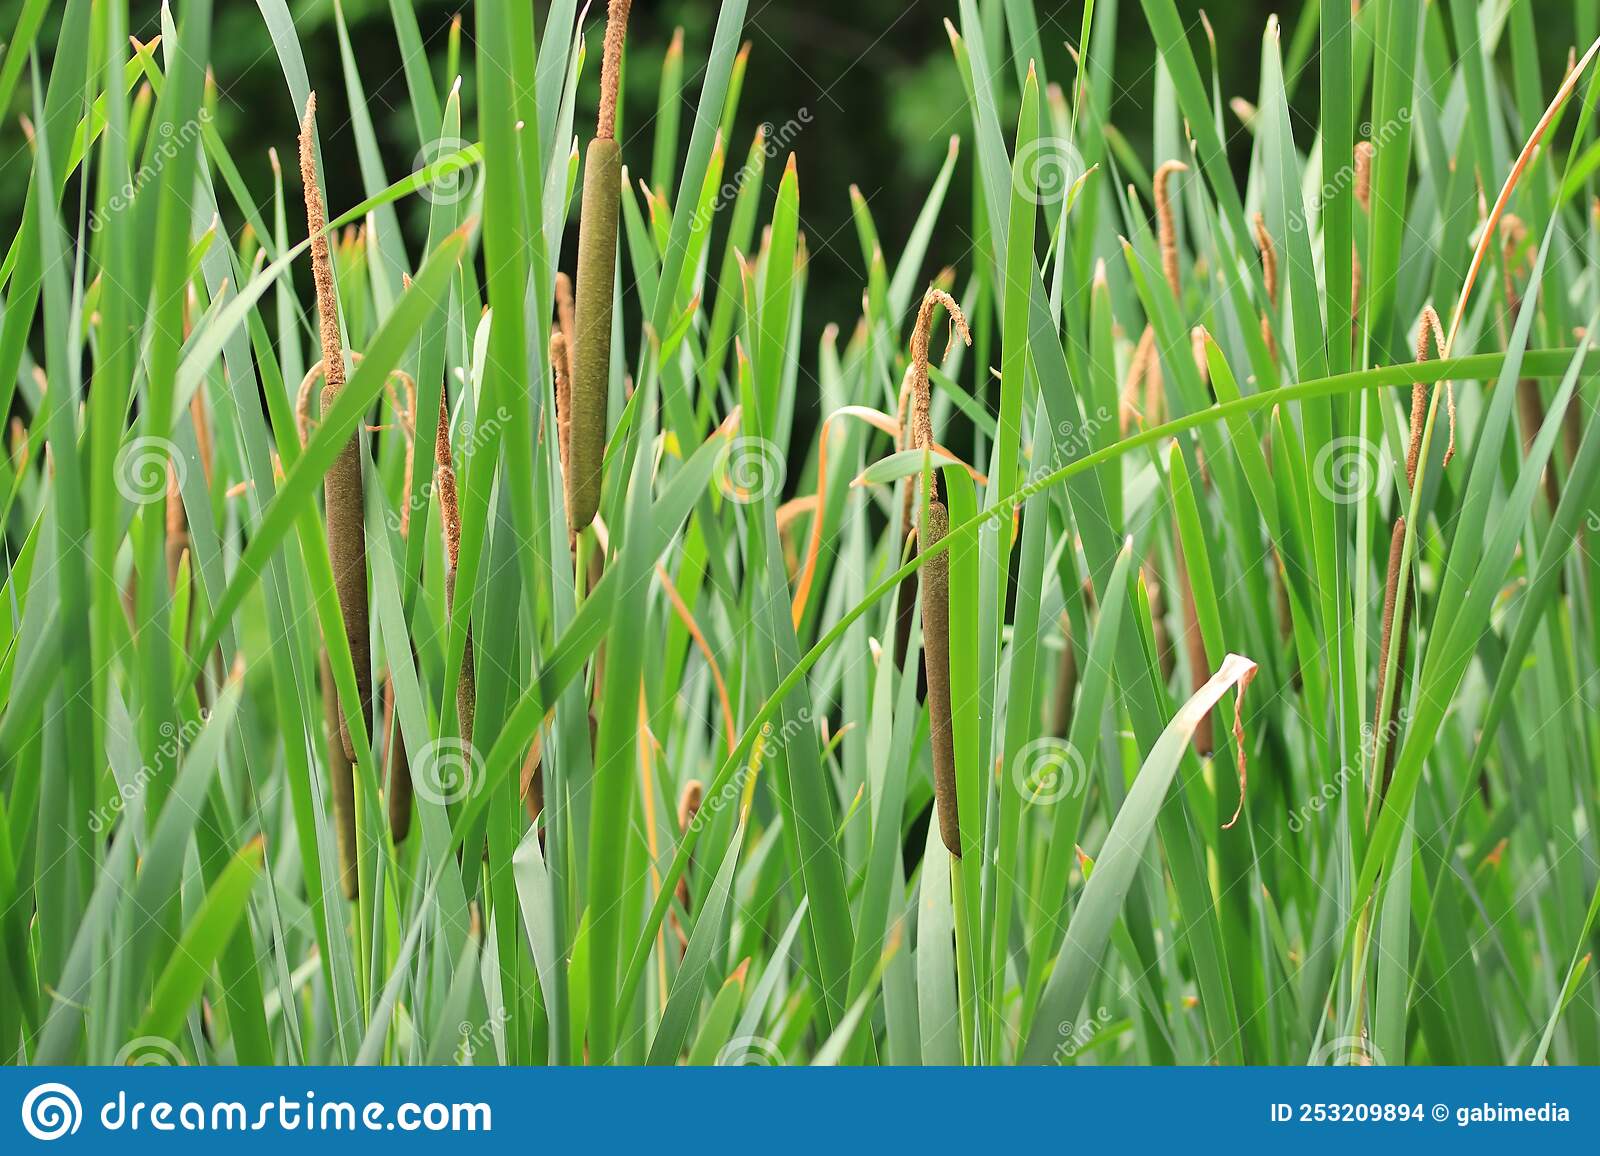  Tall Grass And Reed During Summer. The reeds in the Bucov park